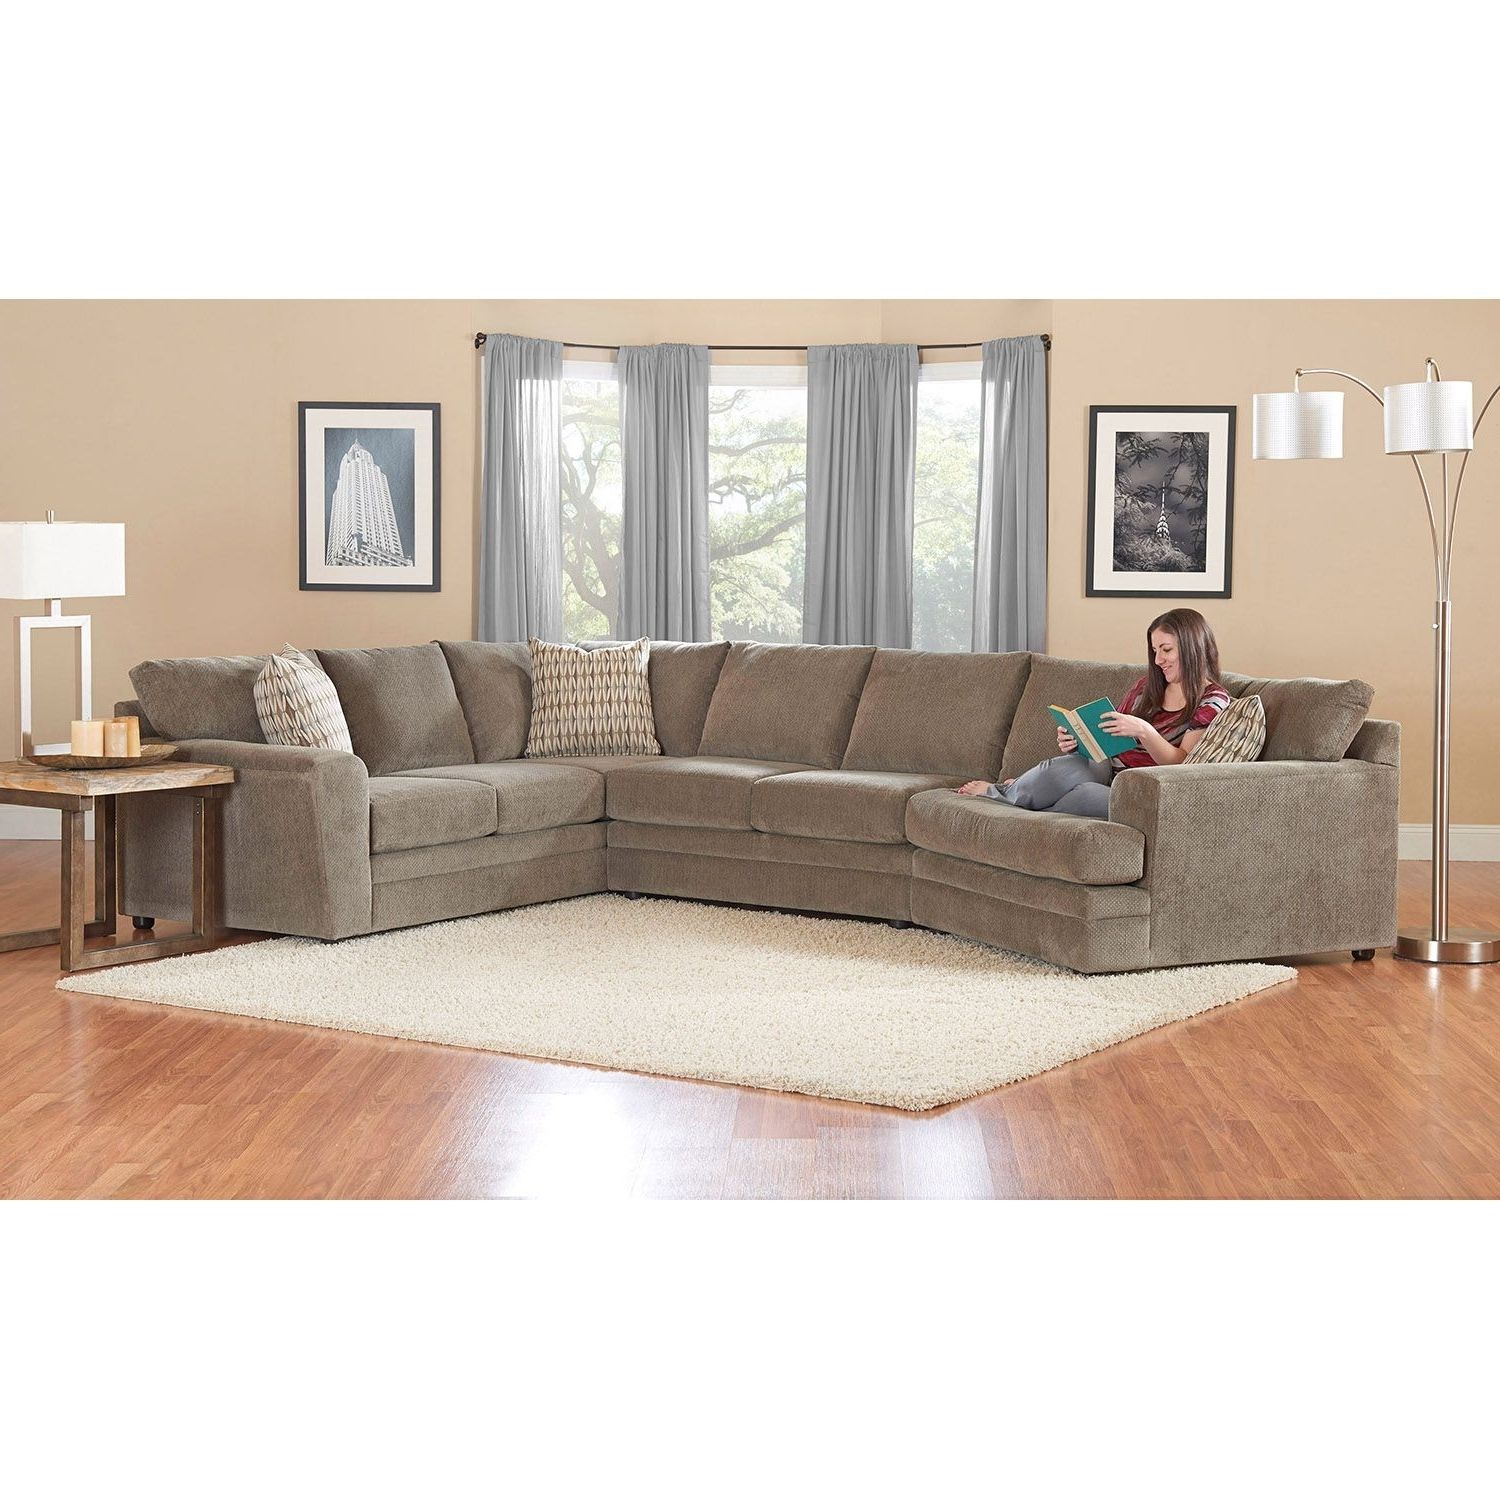 Sectional Sofas At Sam's Club In Most Recent Pinterest (View 1 of 20)